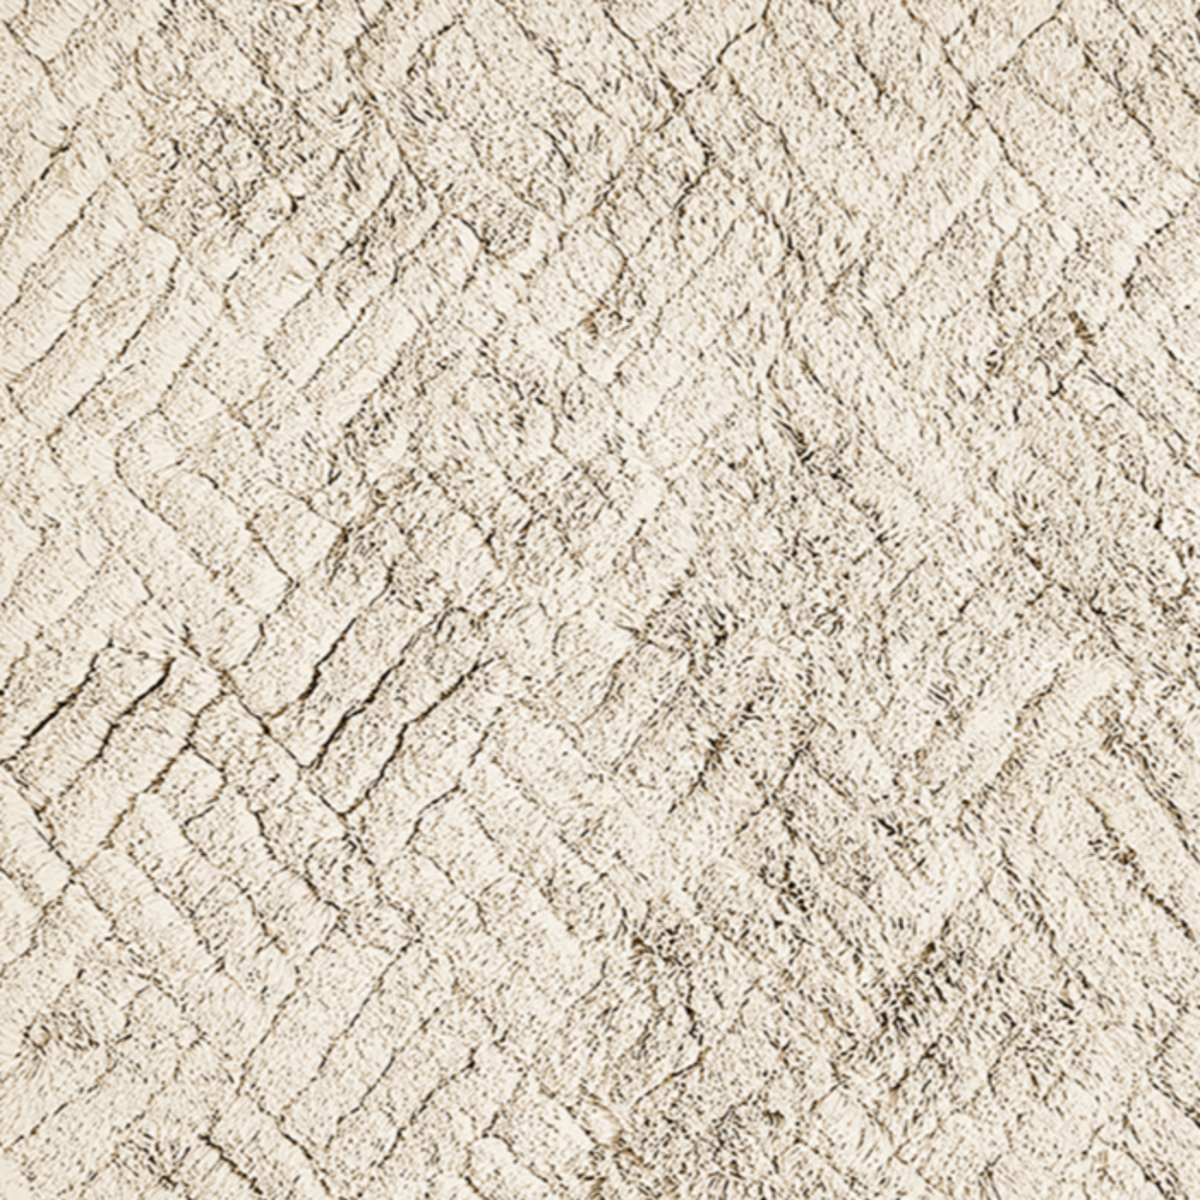 Swatch Sample of Matouk Cairo Bath Rugs Ivory Color